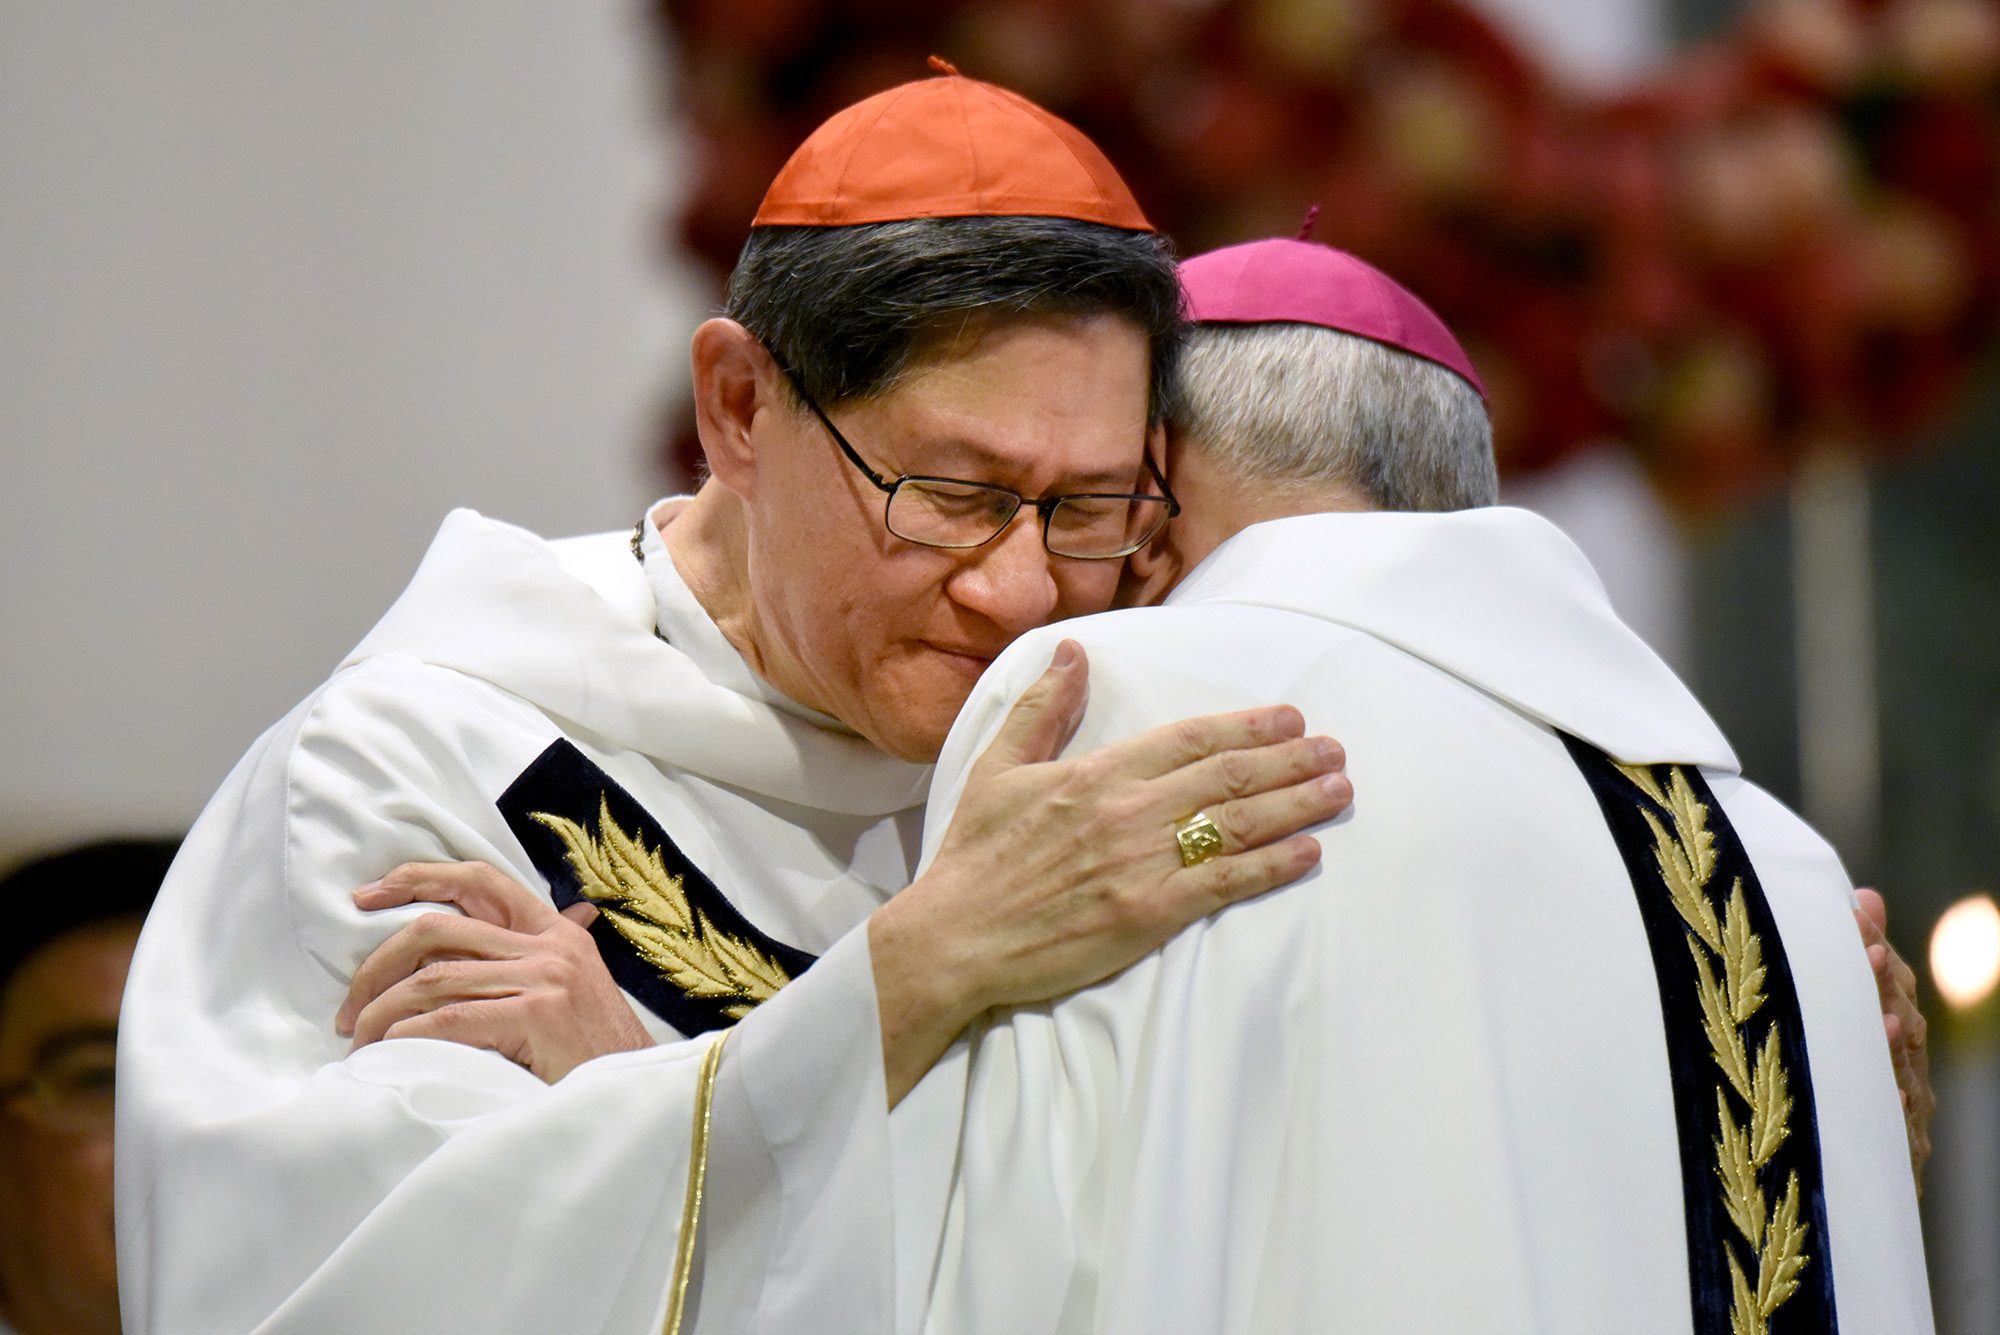 FRATERNAL EMBRACE. Manila Archbishop Luis Antonio Cardinal Tagle and Archbishop Gabriele Giordano Caccia, the Vatican’s ambassador to the Philippines, hug each other during the Mass for the Feast of the Immaculate Conception on December 9, 2019. Photo by Angie de Silva/Rappler 